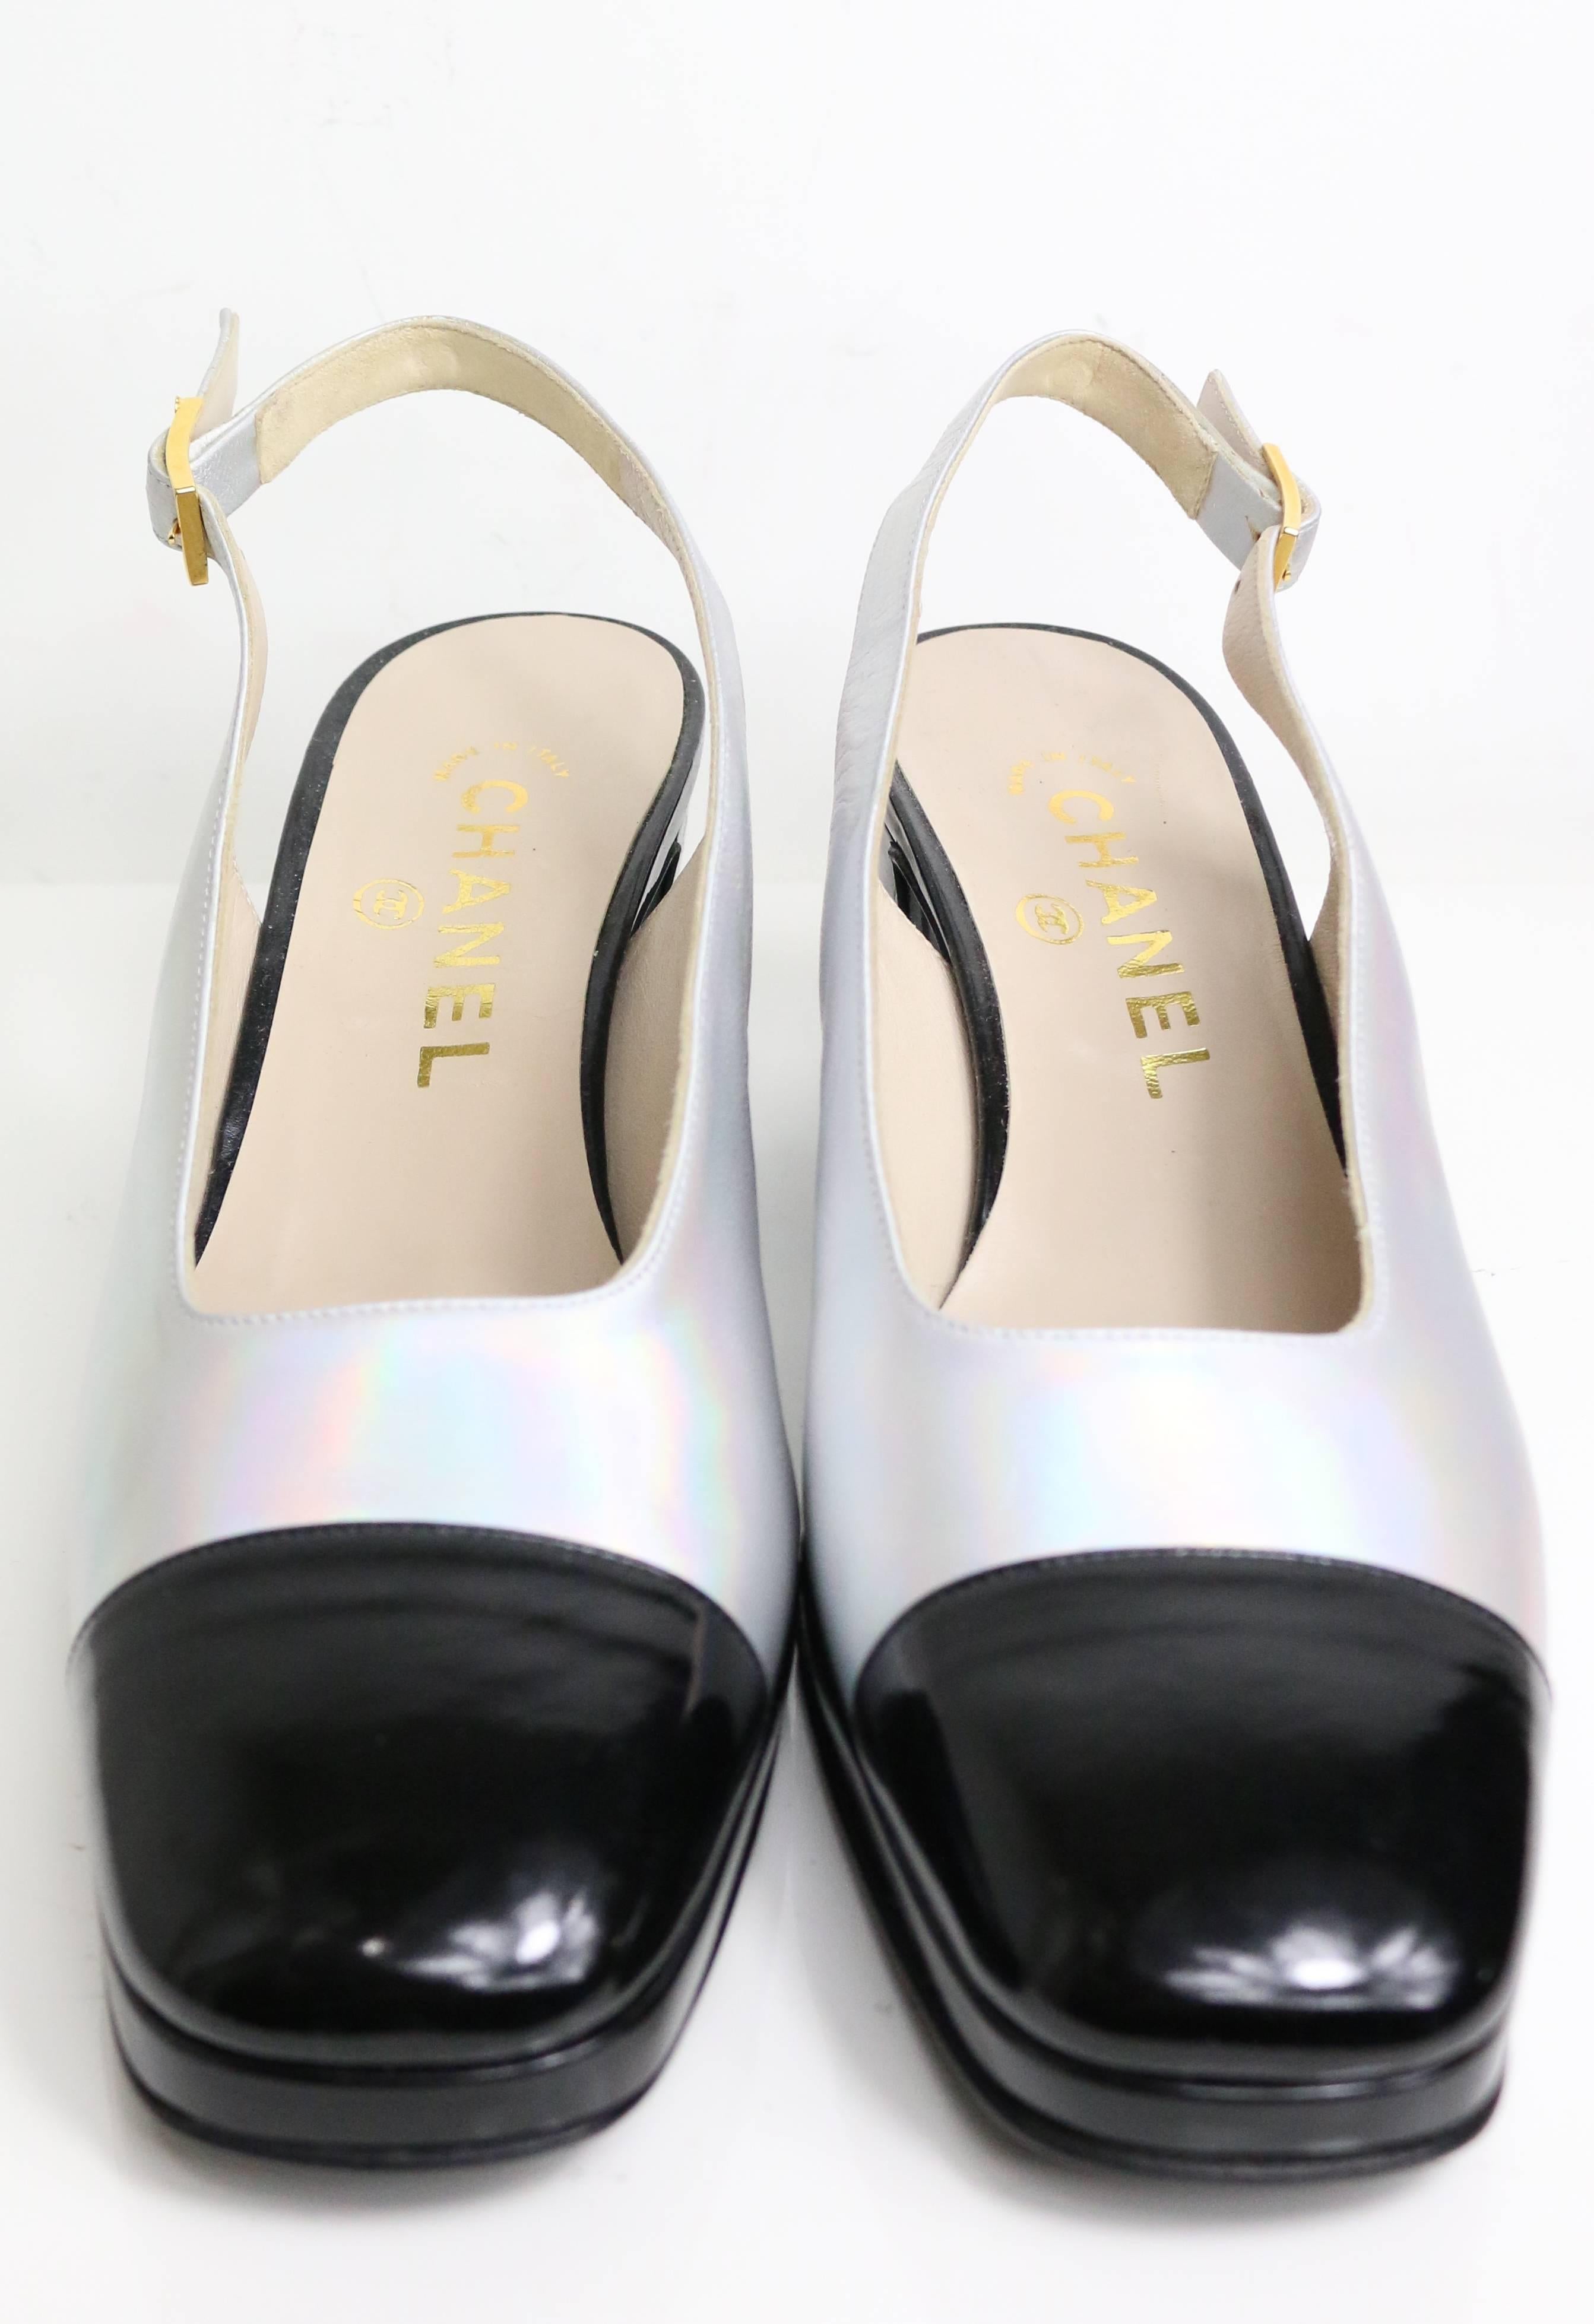 - Vintage 90s Chanel bi tone metallic silver with black patent leather square toe slingback shoes. This is a classic Coco Chanel style, elegant and chic summer shoes. 
- Size 37.5.

- Made in Italy.

- Comes with dust bag 

- Condition: Excellent